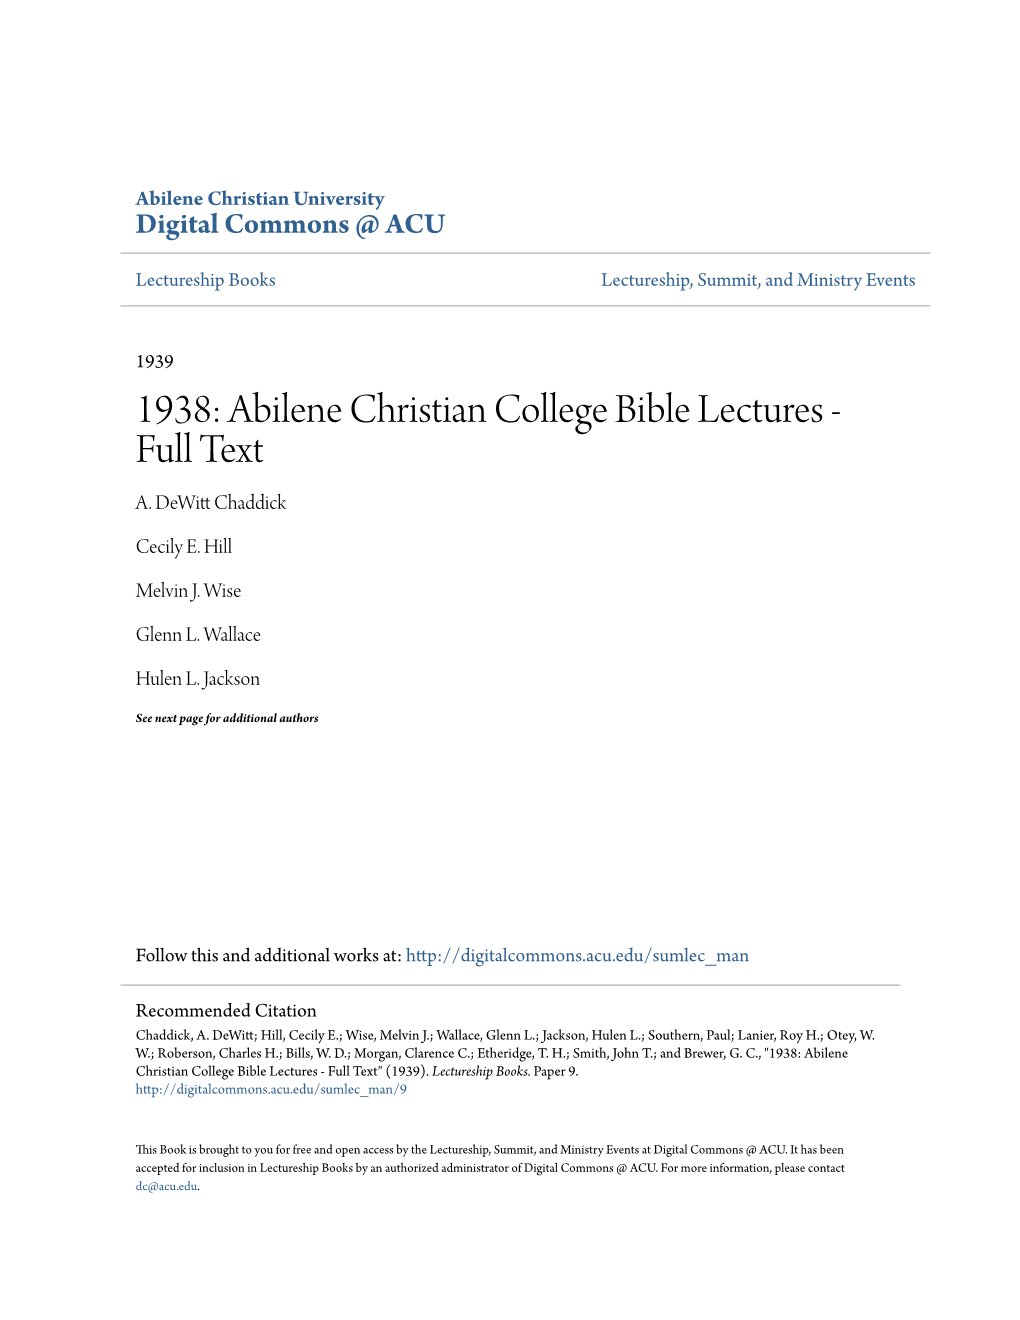 Abilene Christian College Bible Lectures - Full Text A